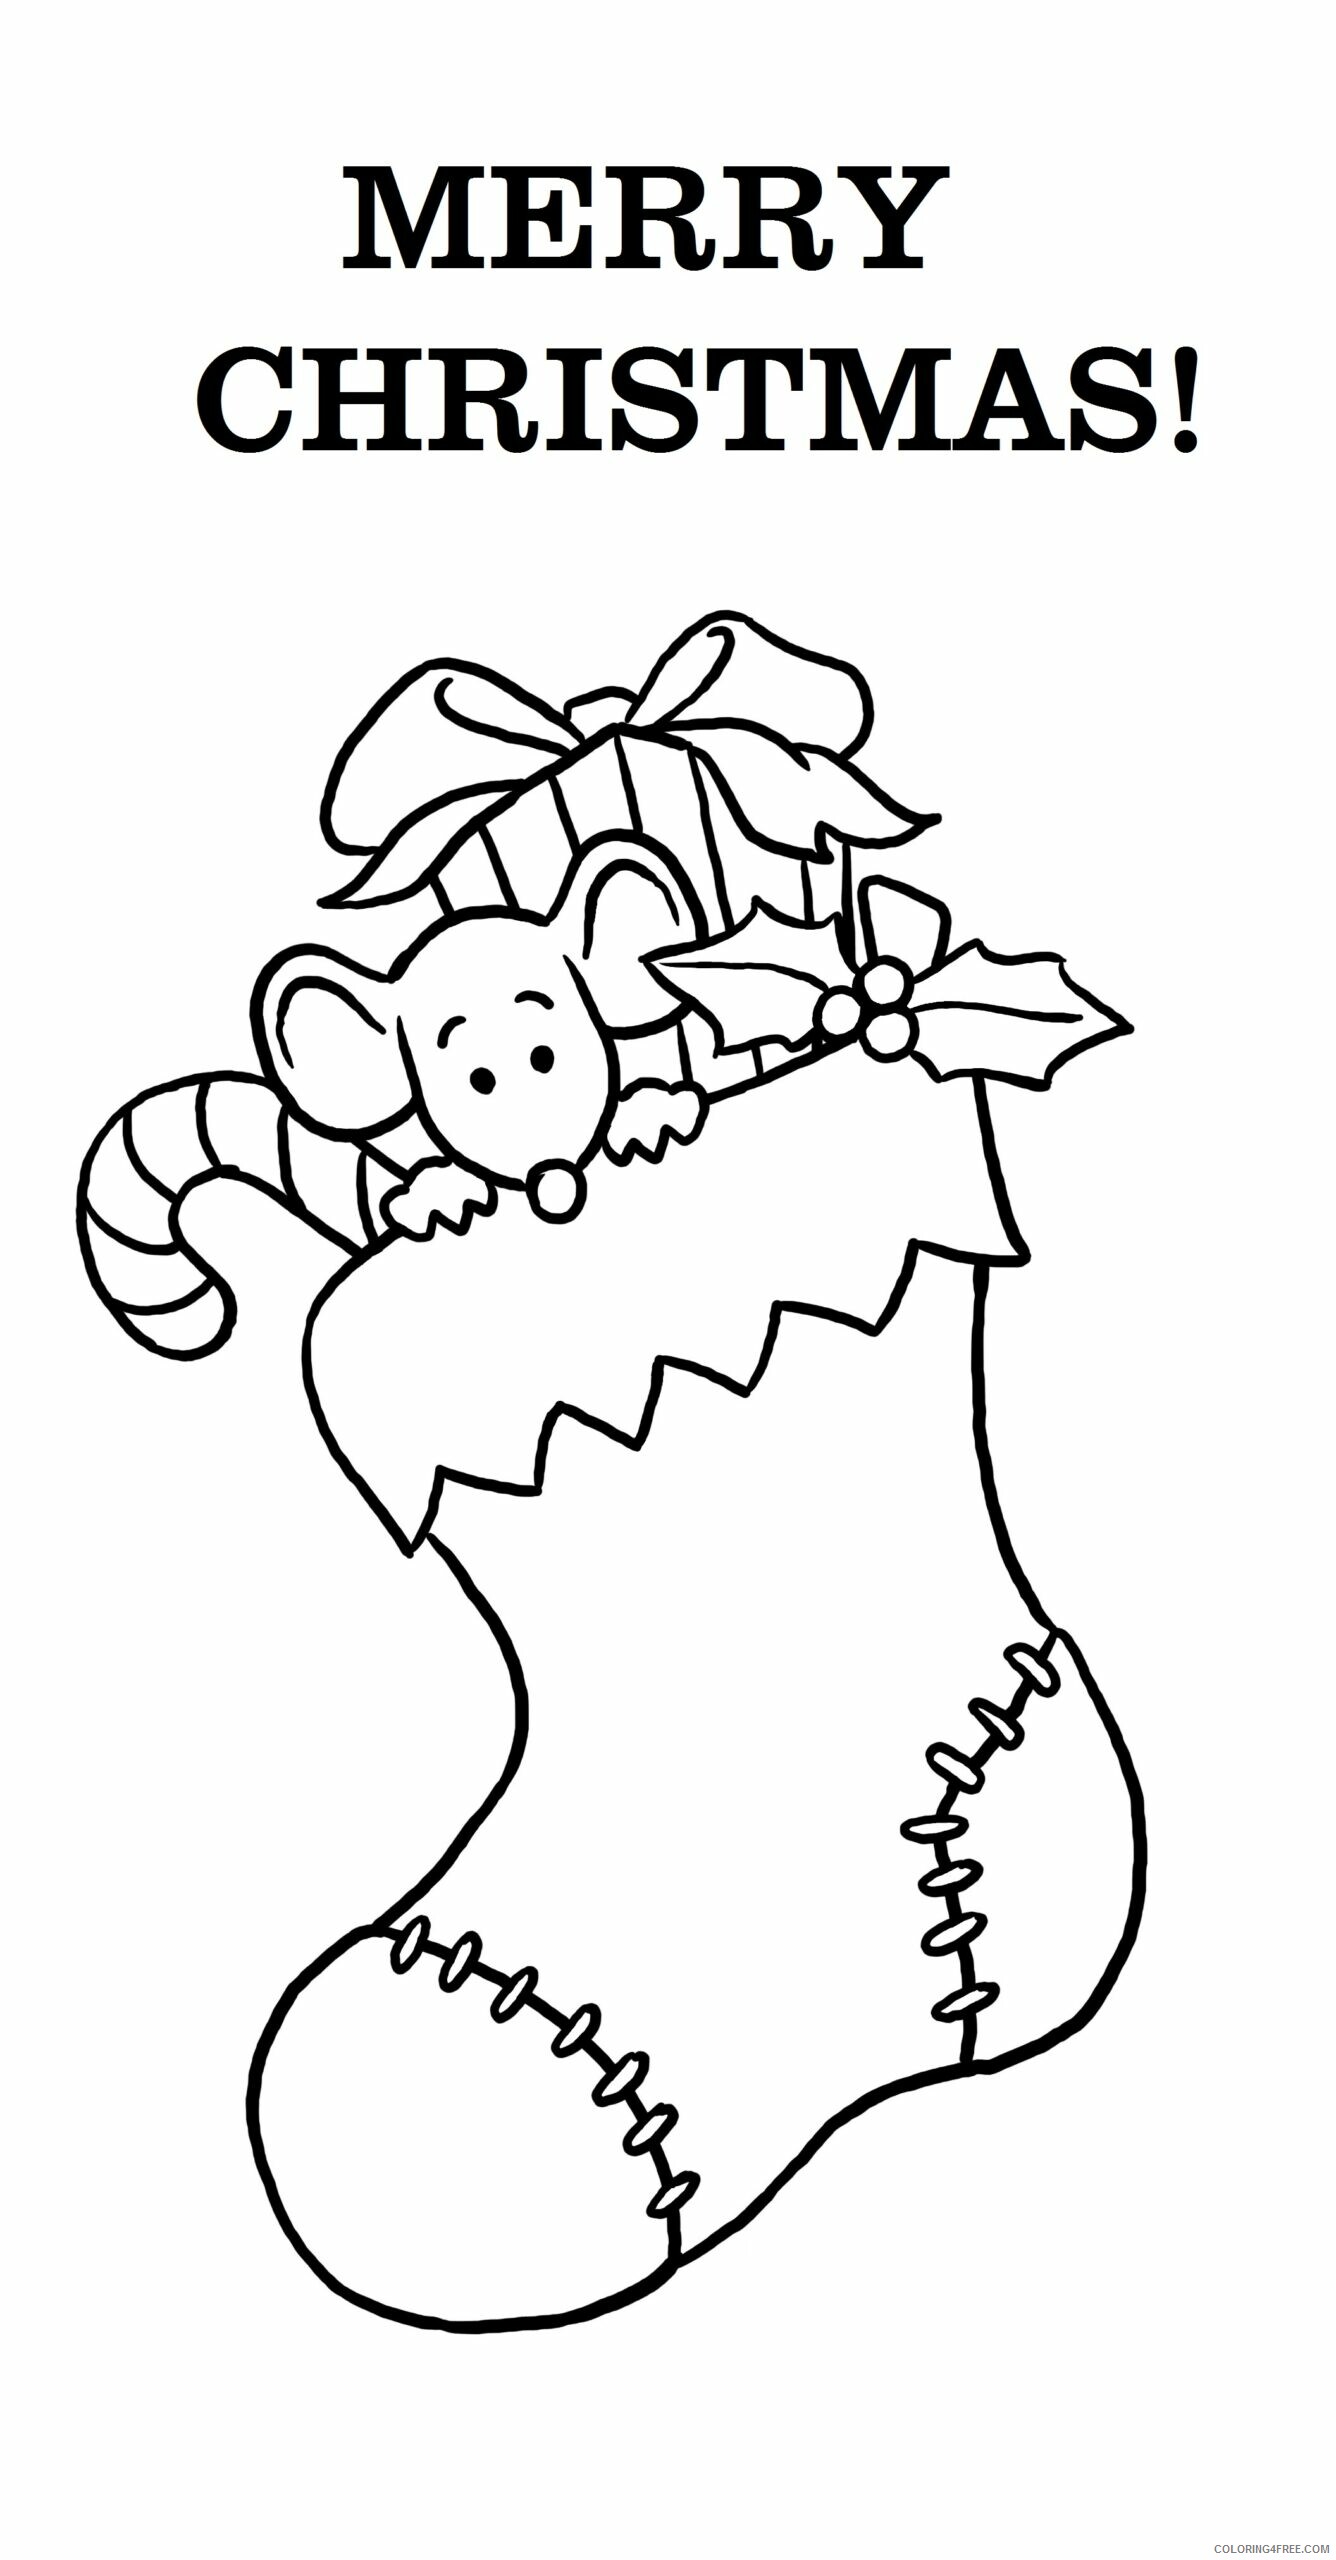 Merry Christmas Coloring Pages Merry Christmas Stocking Printable 2020 397 Coloring4free